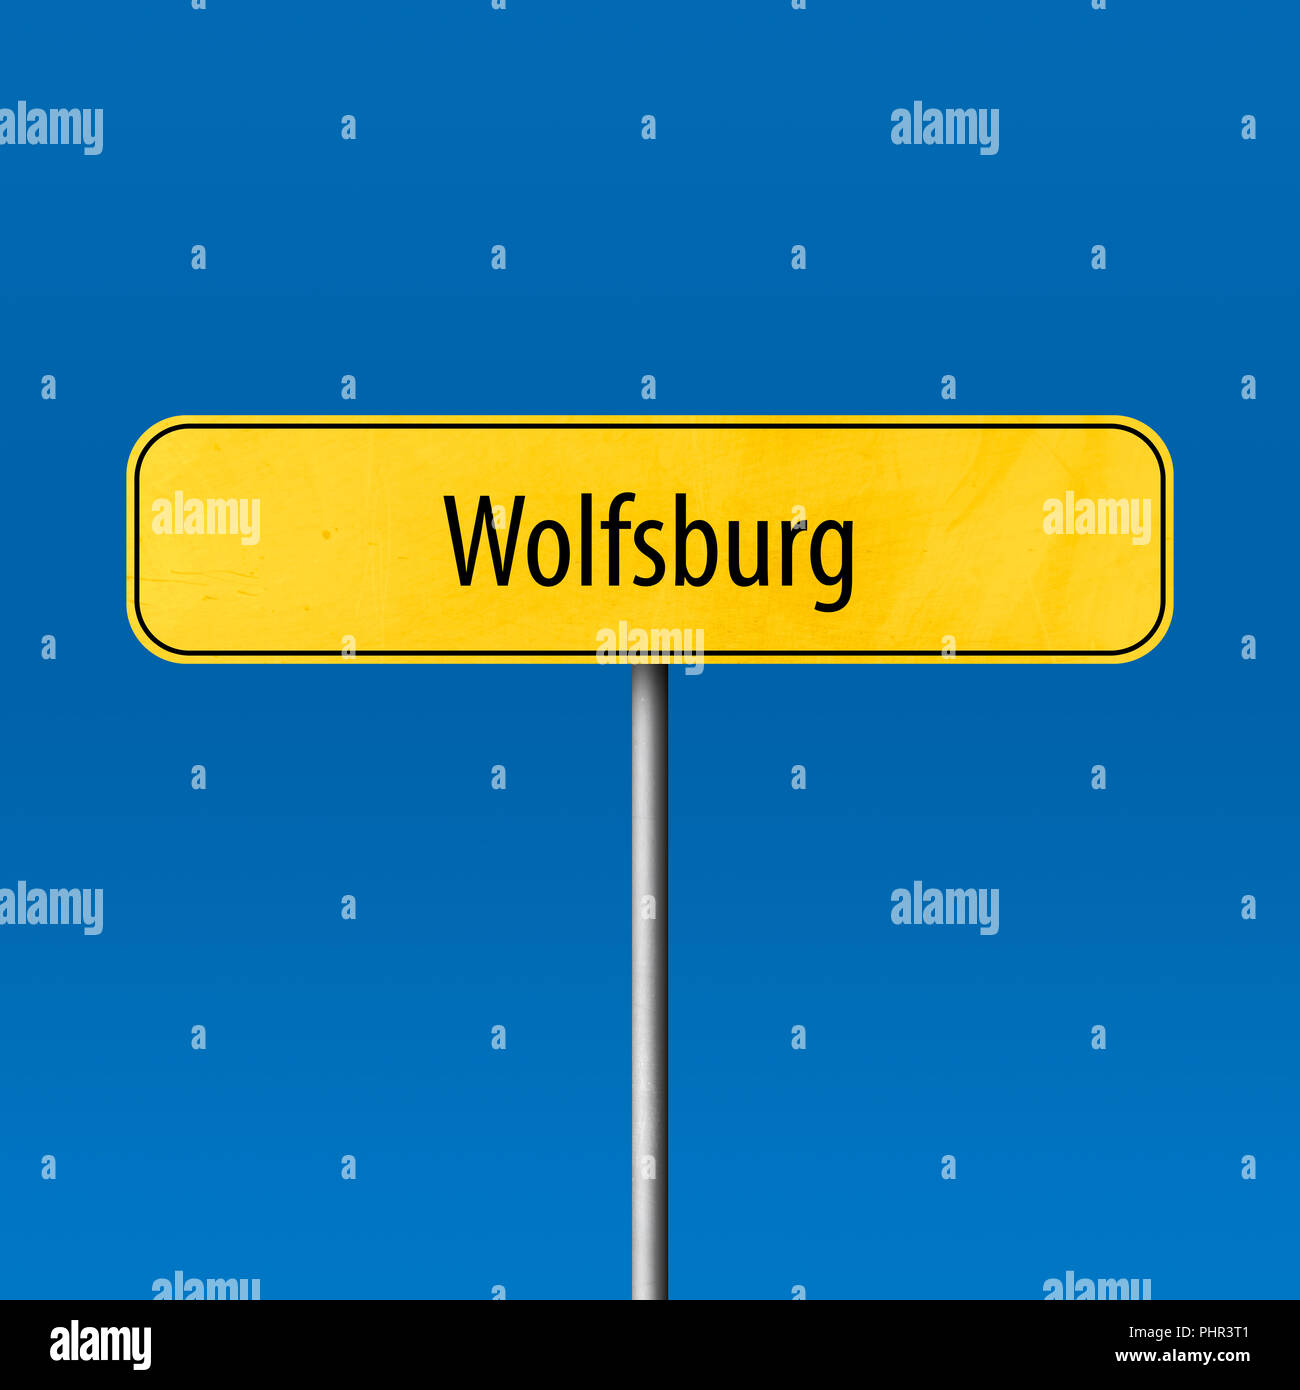 Wolfsburg - town sign, place name sign Stock Photo